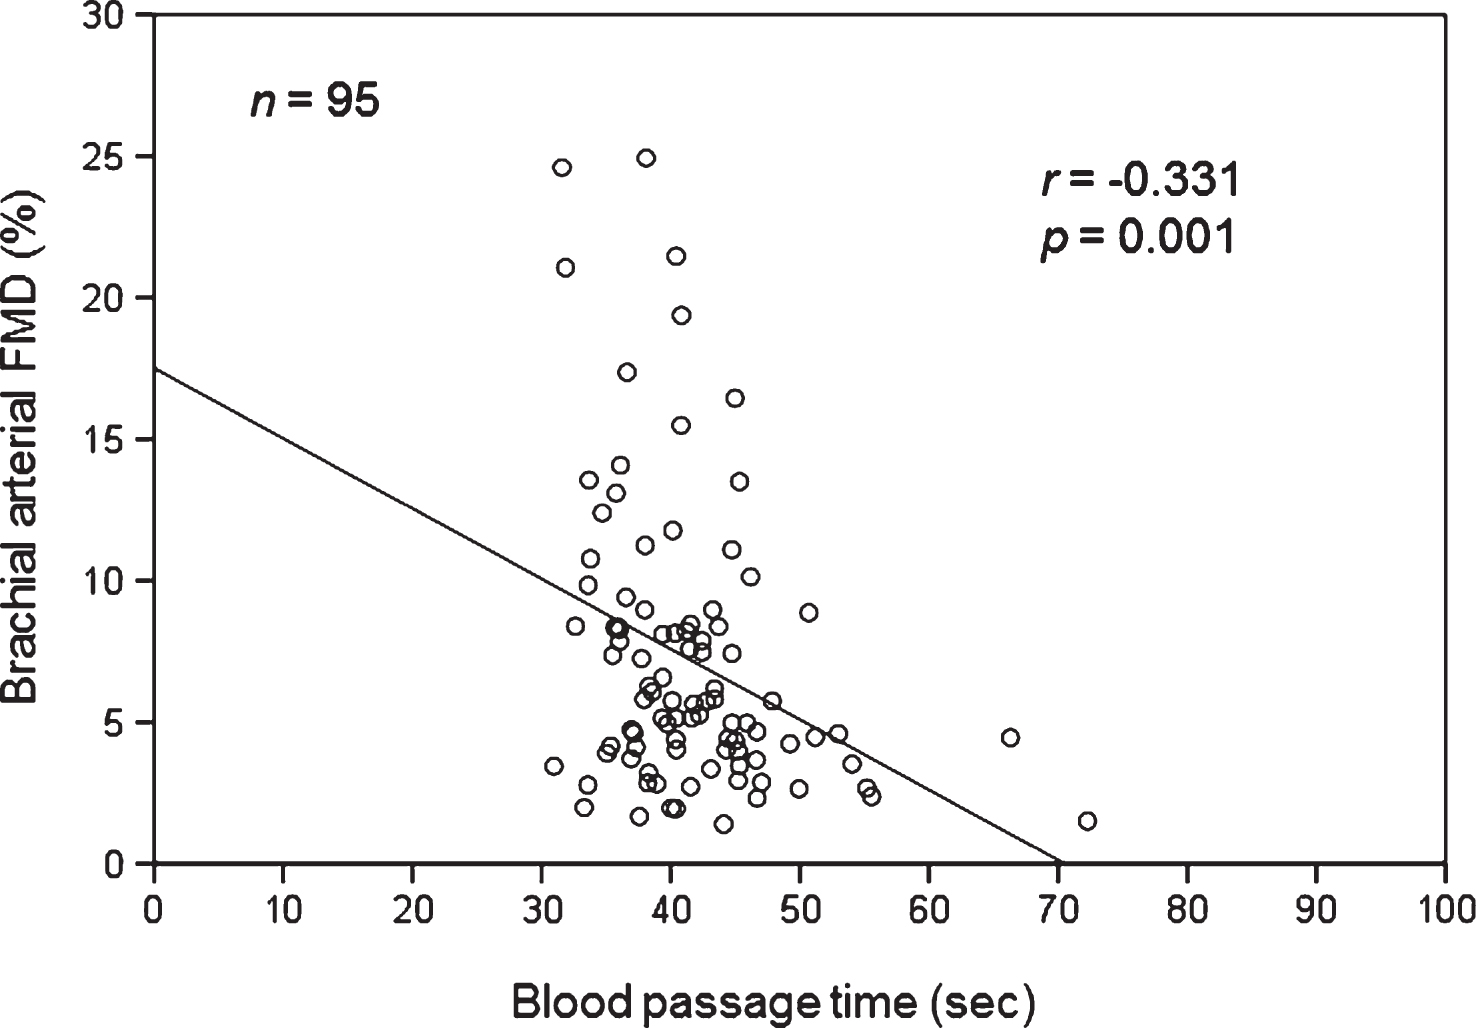 Correlation between blood passage time and brachial arterial flow-mediated vasodilatation (FMD) in patients with coronary risk factors.